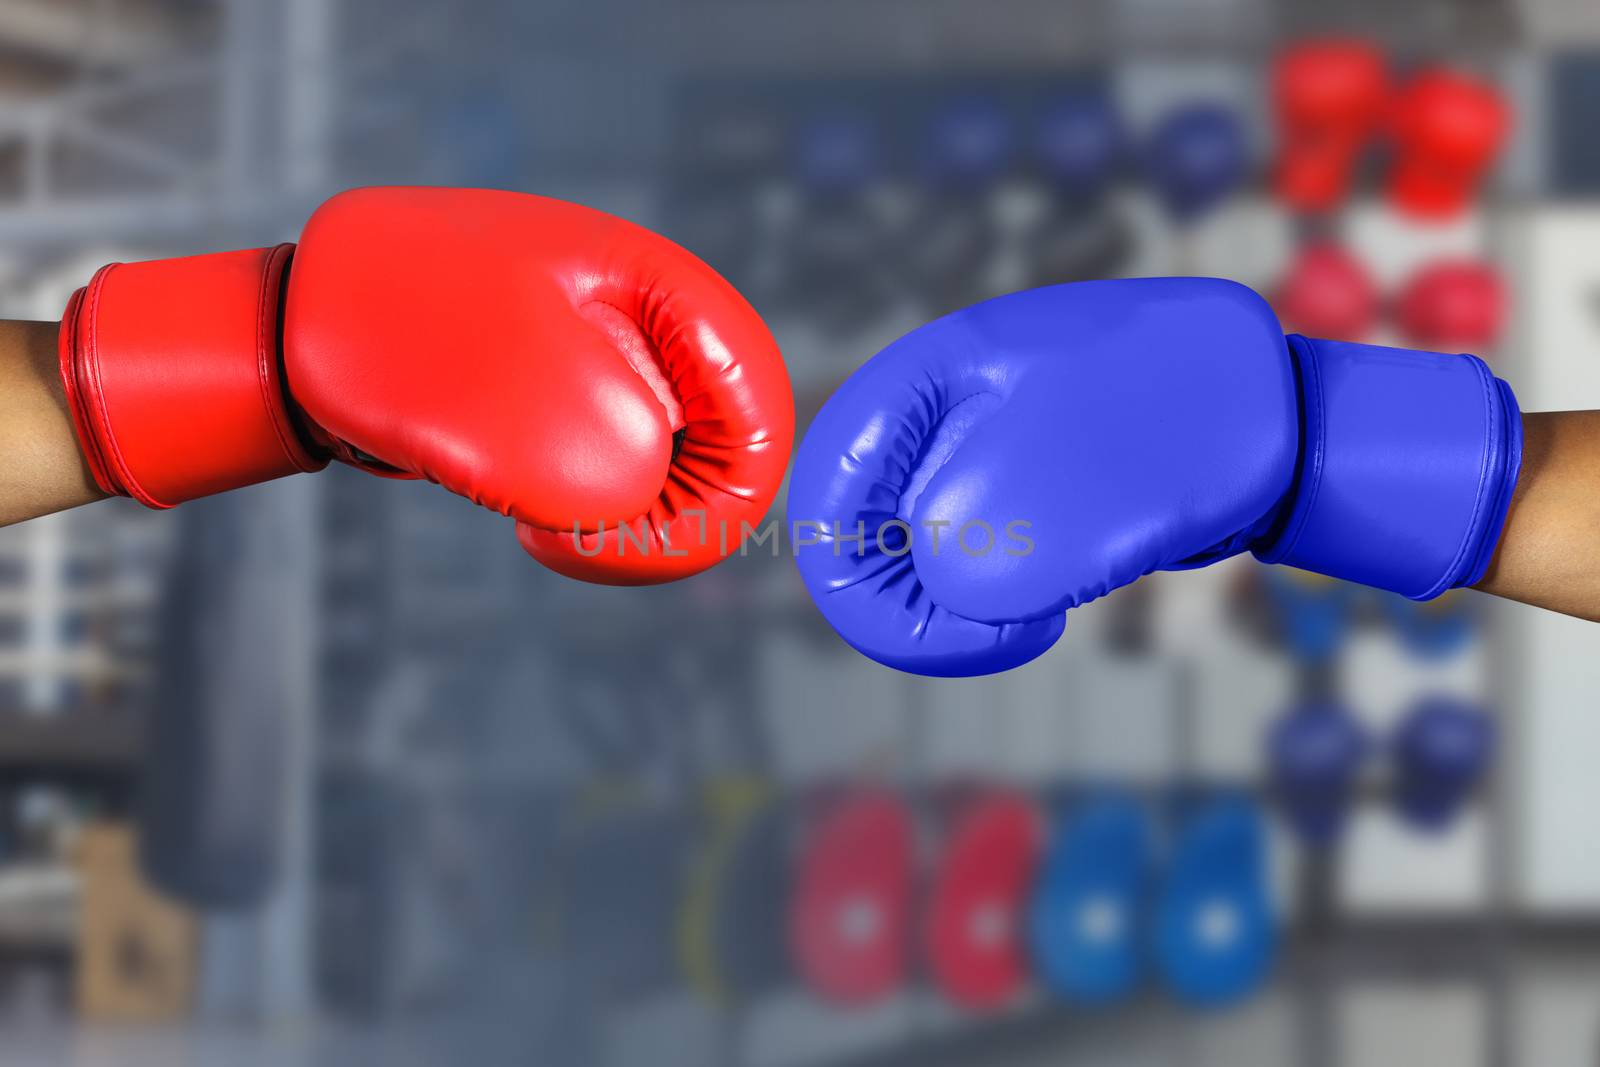 Red and Blue boxing gloves in Gym Fitness 